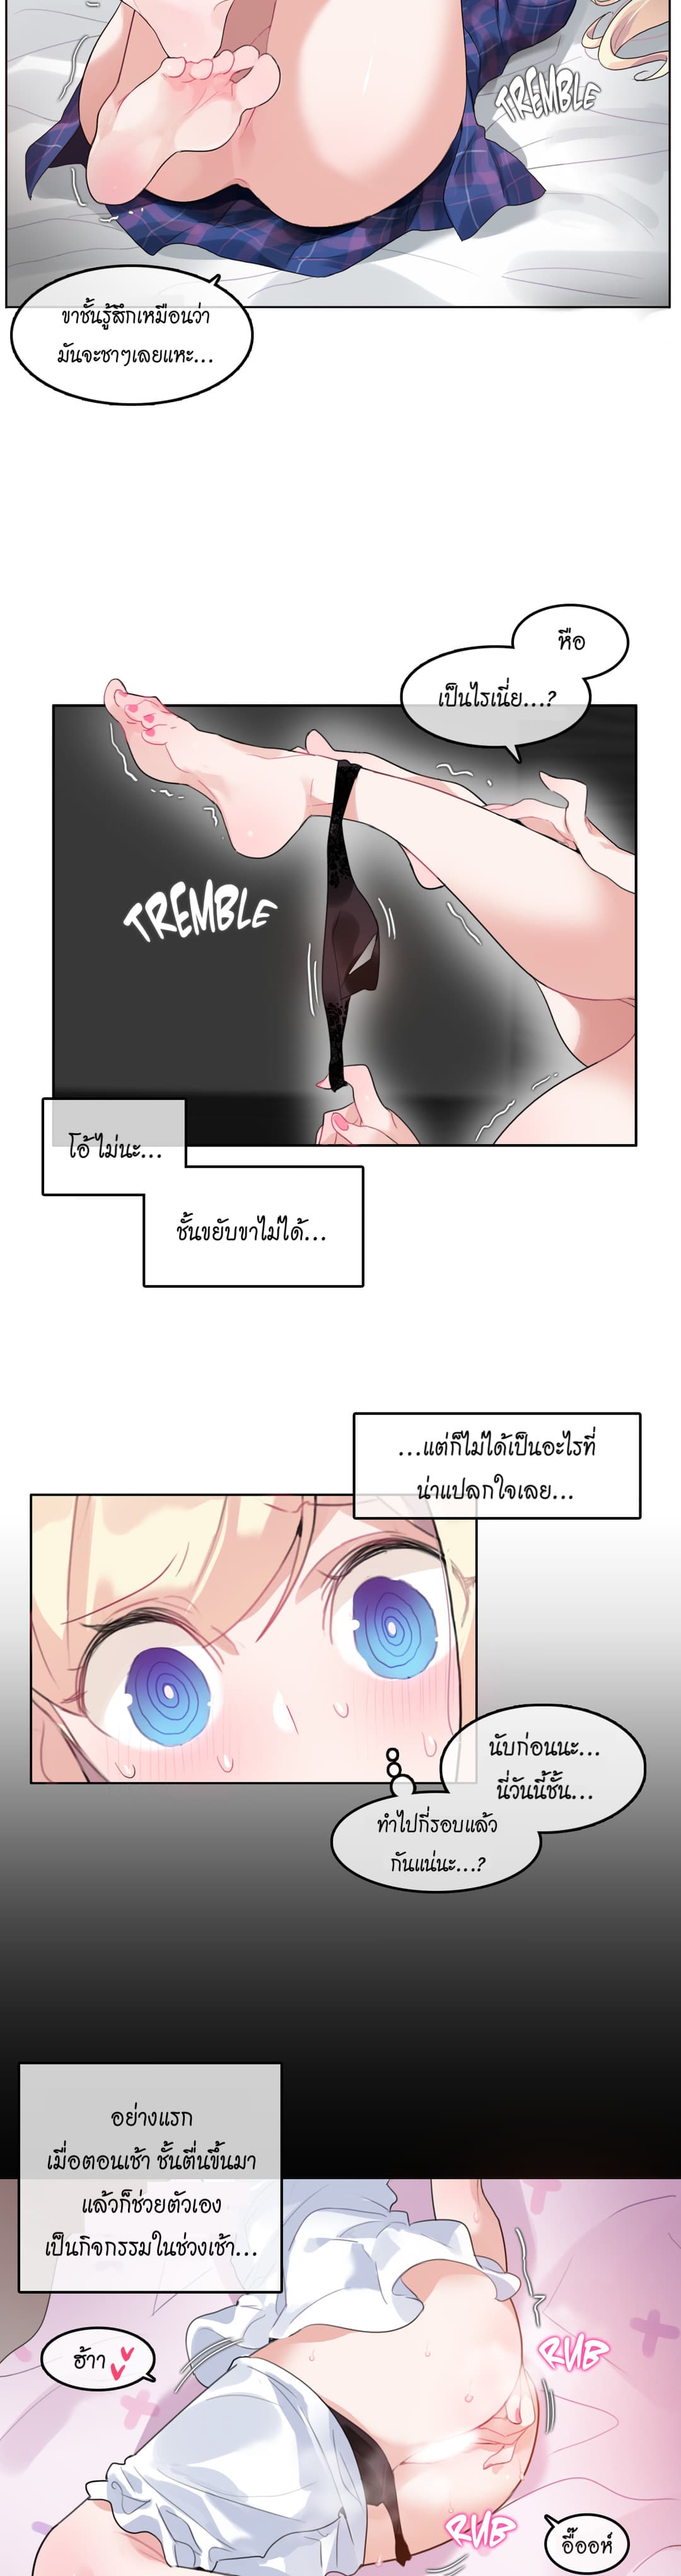 A Pervert’s Daily Life 45 (4)